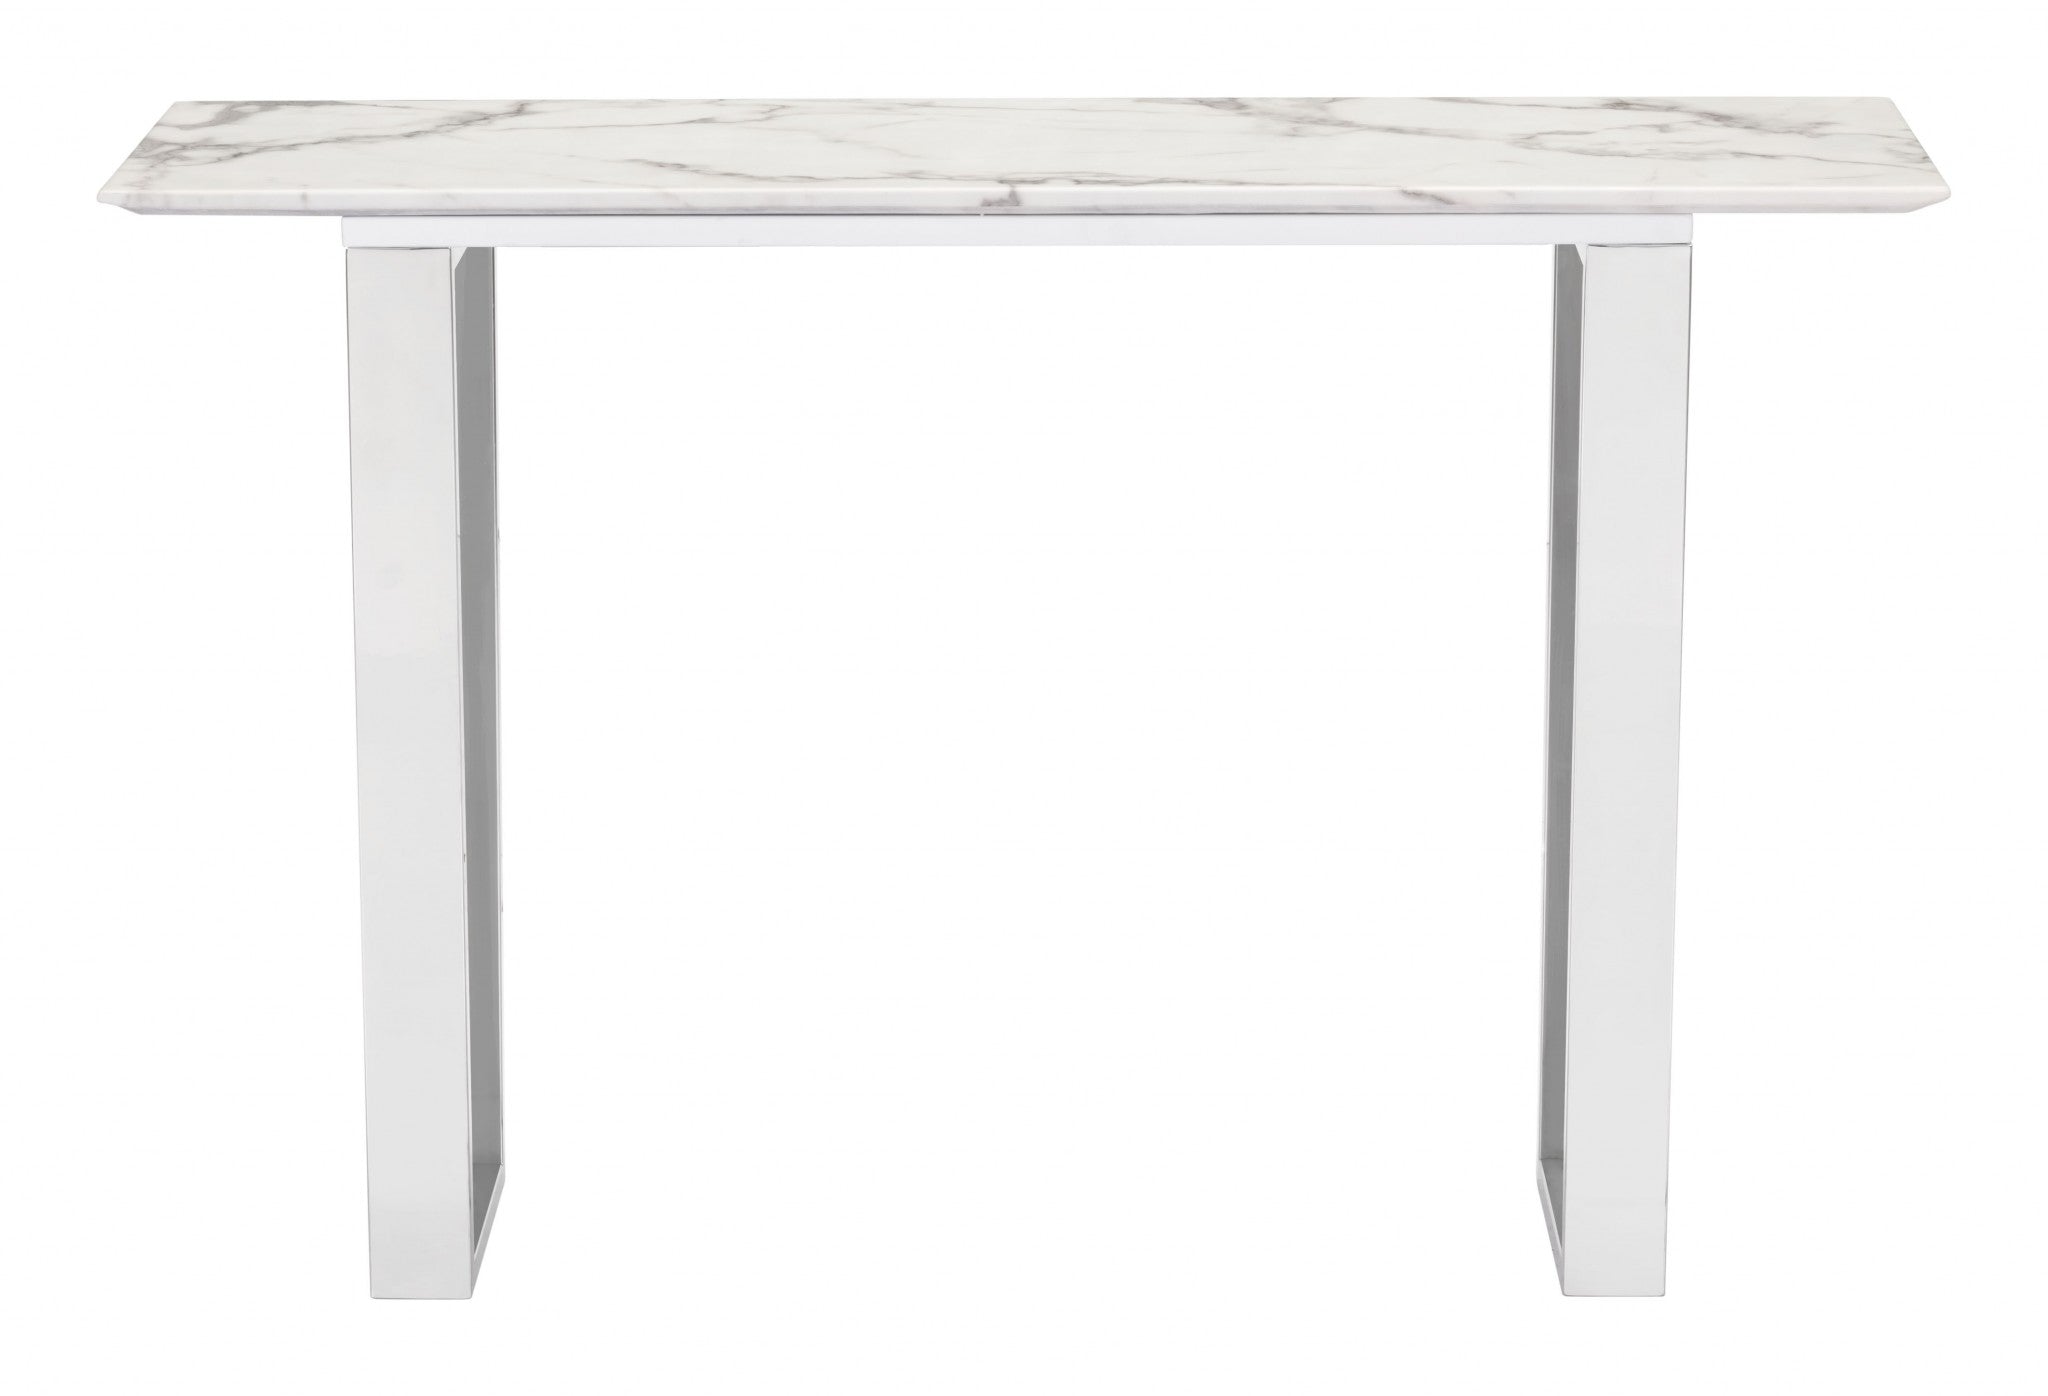 Designer's Choice White Faux Marble and Steel Console Table